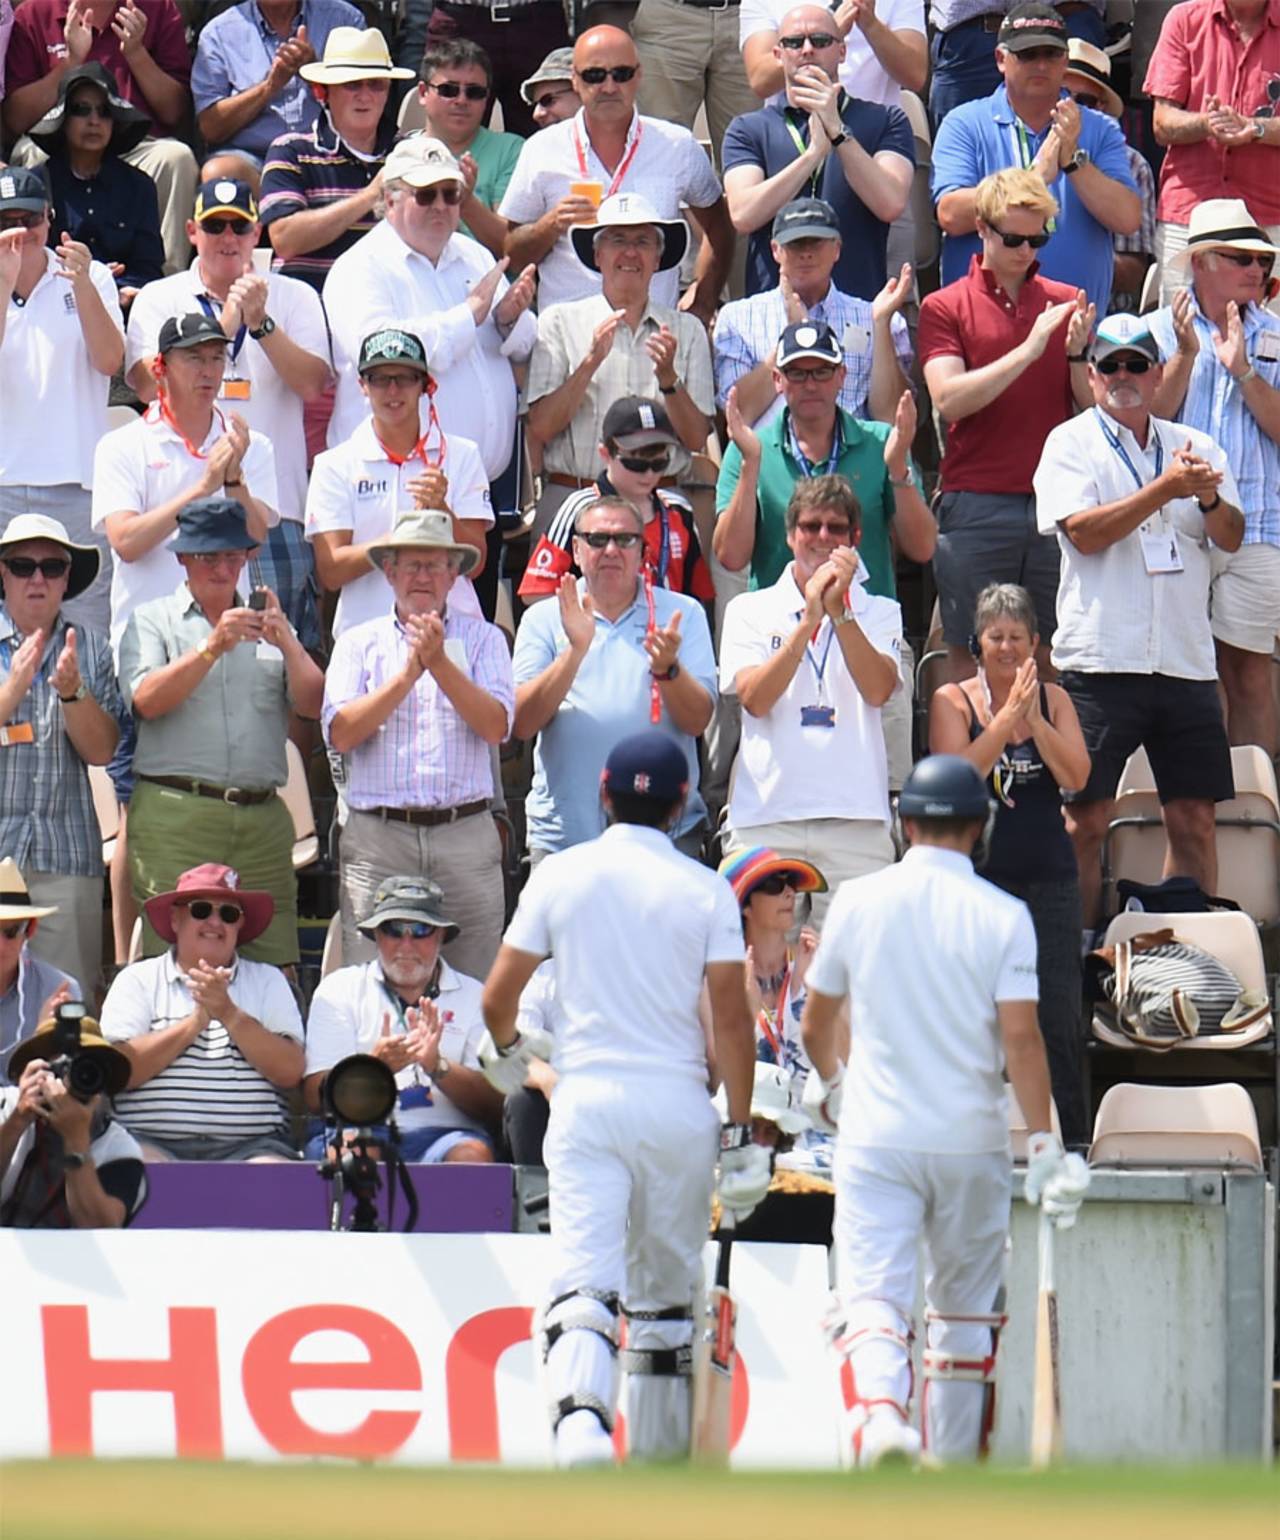 England's batsmen walk off to warm applause at lunch, England v India, 3rd Investec Test, Ageas Bowl, 1st day, July 27, 2014